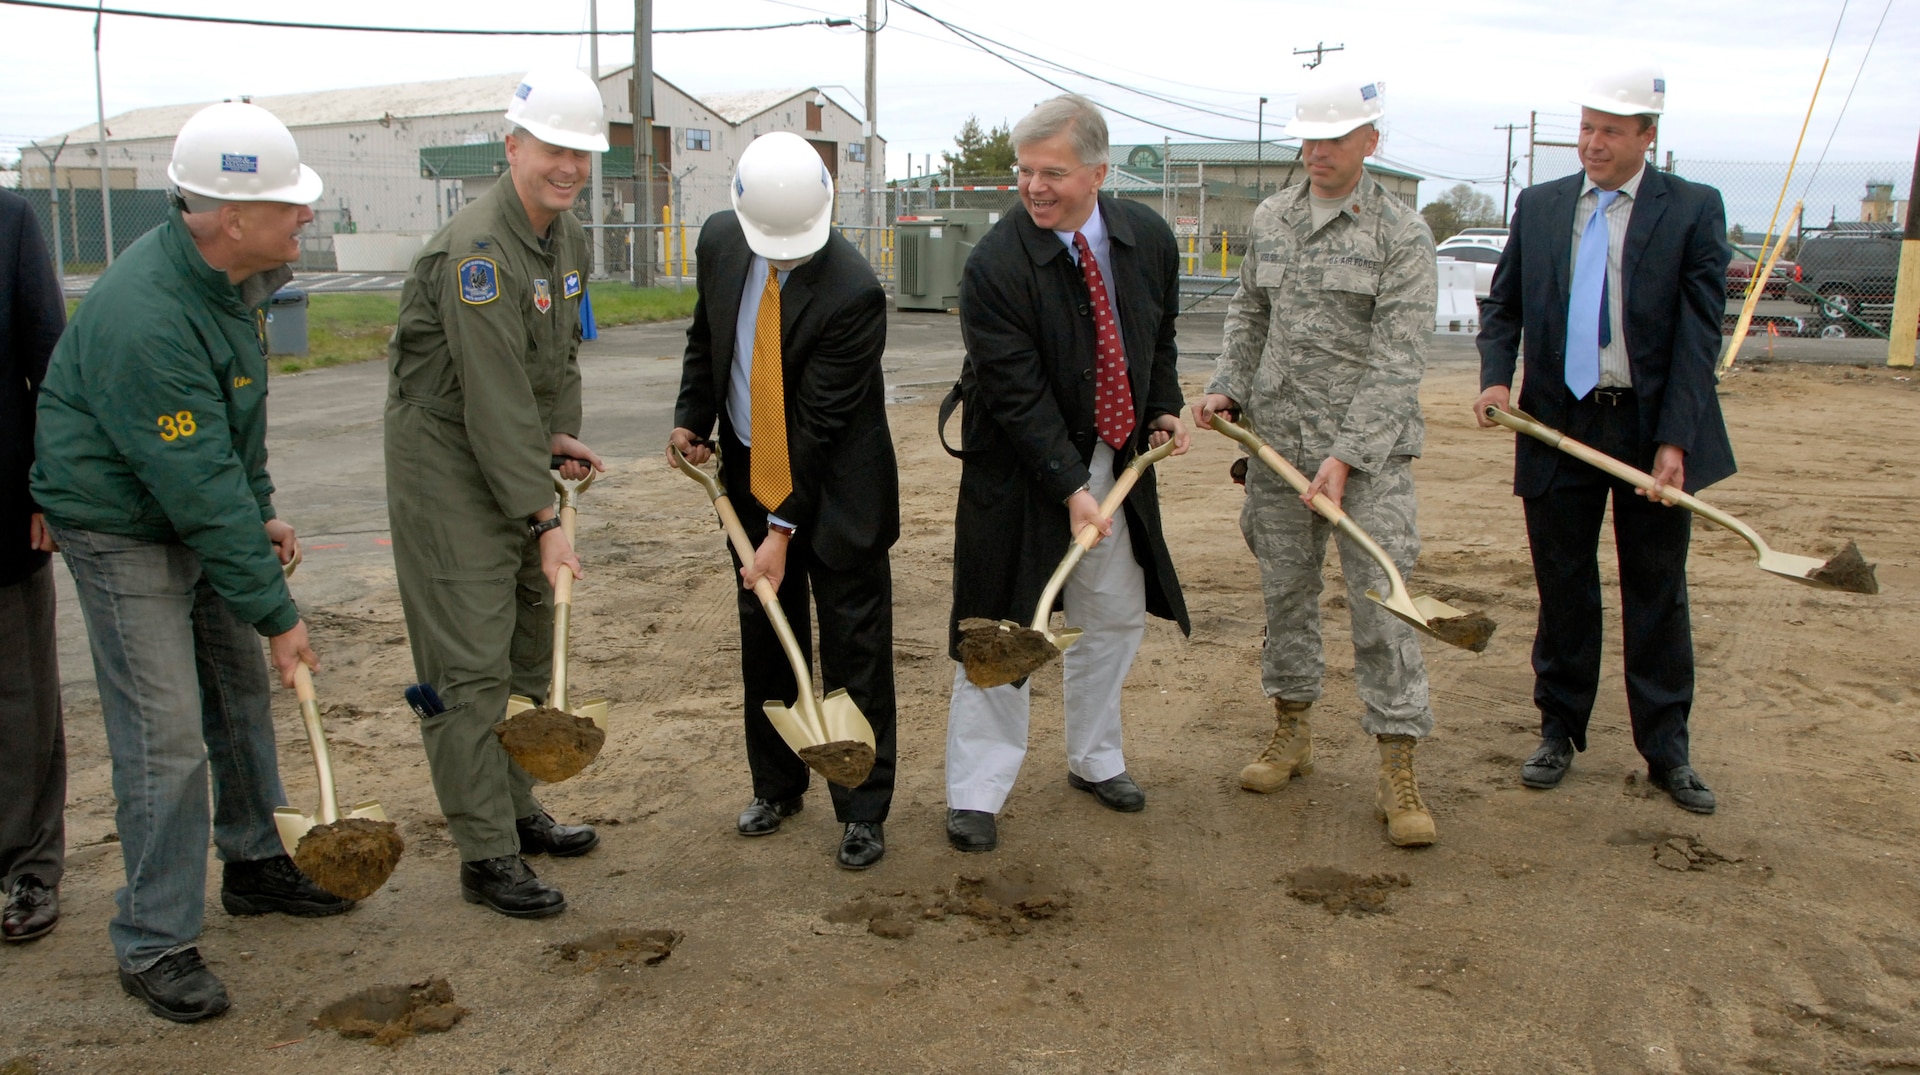 Michael Jacobs, chairman of the Board of the Friends of the 106th, Col. Michael F. Canders of the 106th Rescue Wing, Congressman Timothy Bishop, New York State Assemblyman Fred Thiele, Maj. John D. McElroy of the 103rd Rescue Squadron, and Keith Wood, supervisor for Racanelli Construction, break ground for a new building to house the 103rd Rescue Squadron at F.S. Gabreski Air National Guard Base in Westhampton Beach, N.Y., on May 2, 2009.